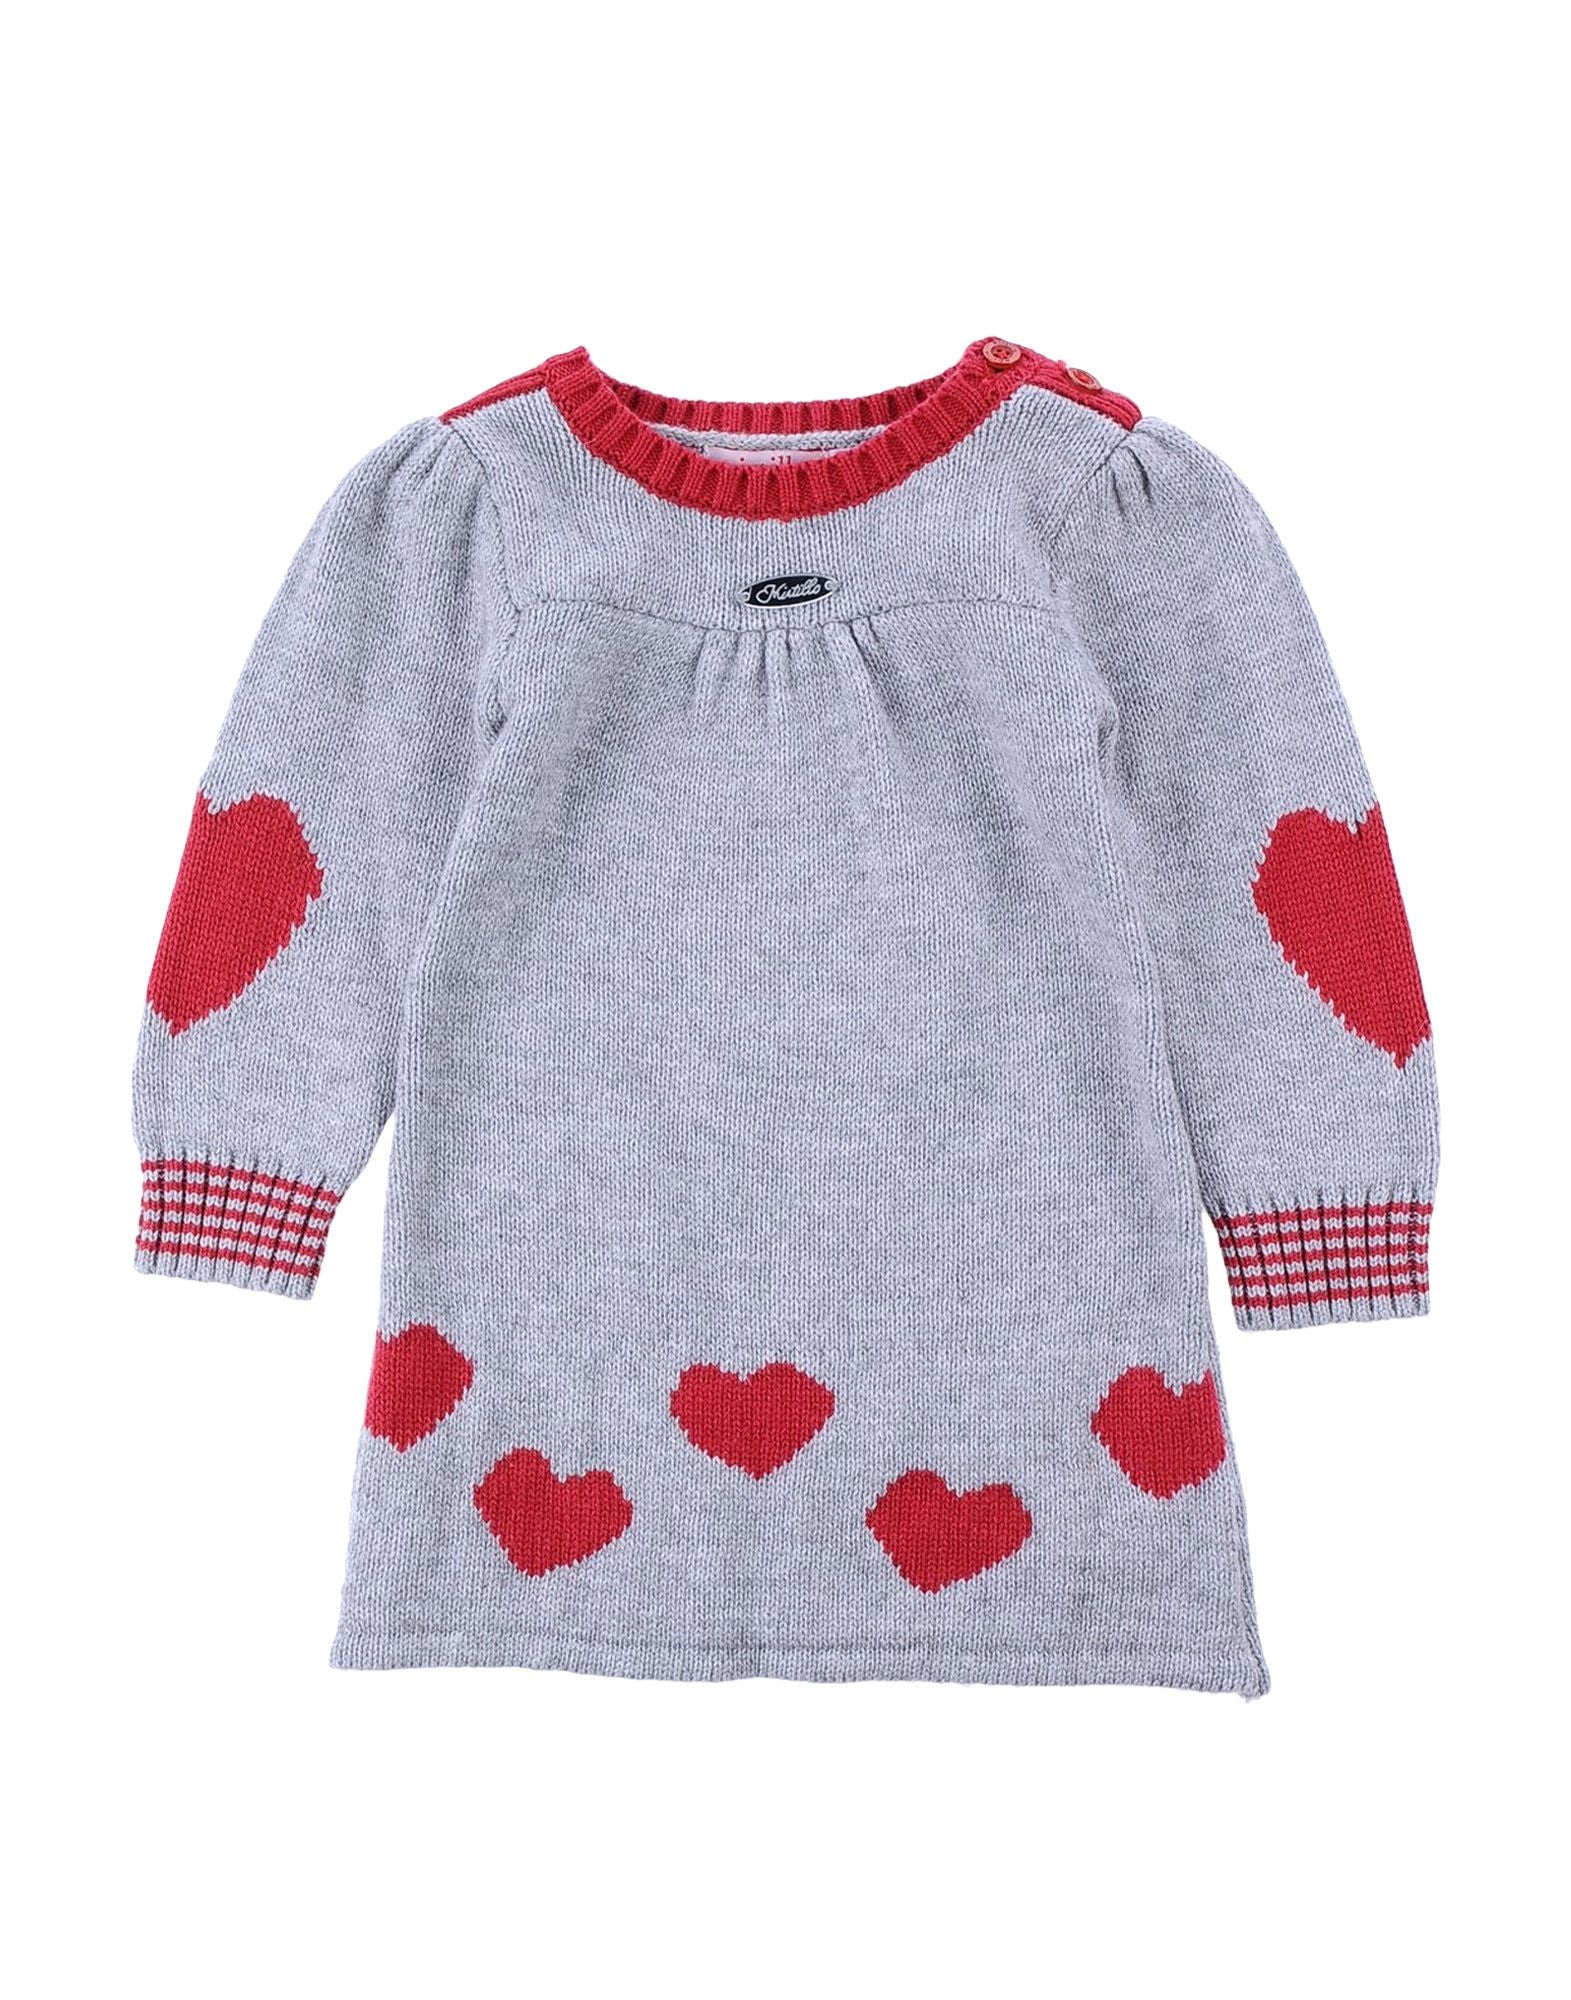 
  Tricot dress of the Mirtillo girl's clothing line, with buttoning on the
  shoulder and heart ...